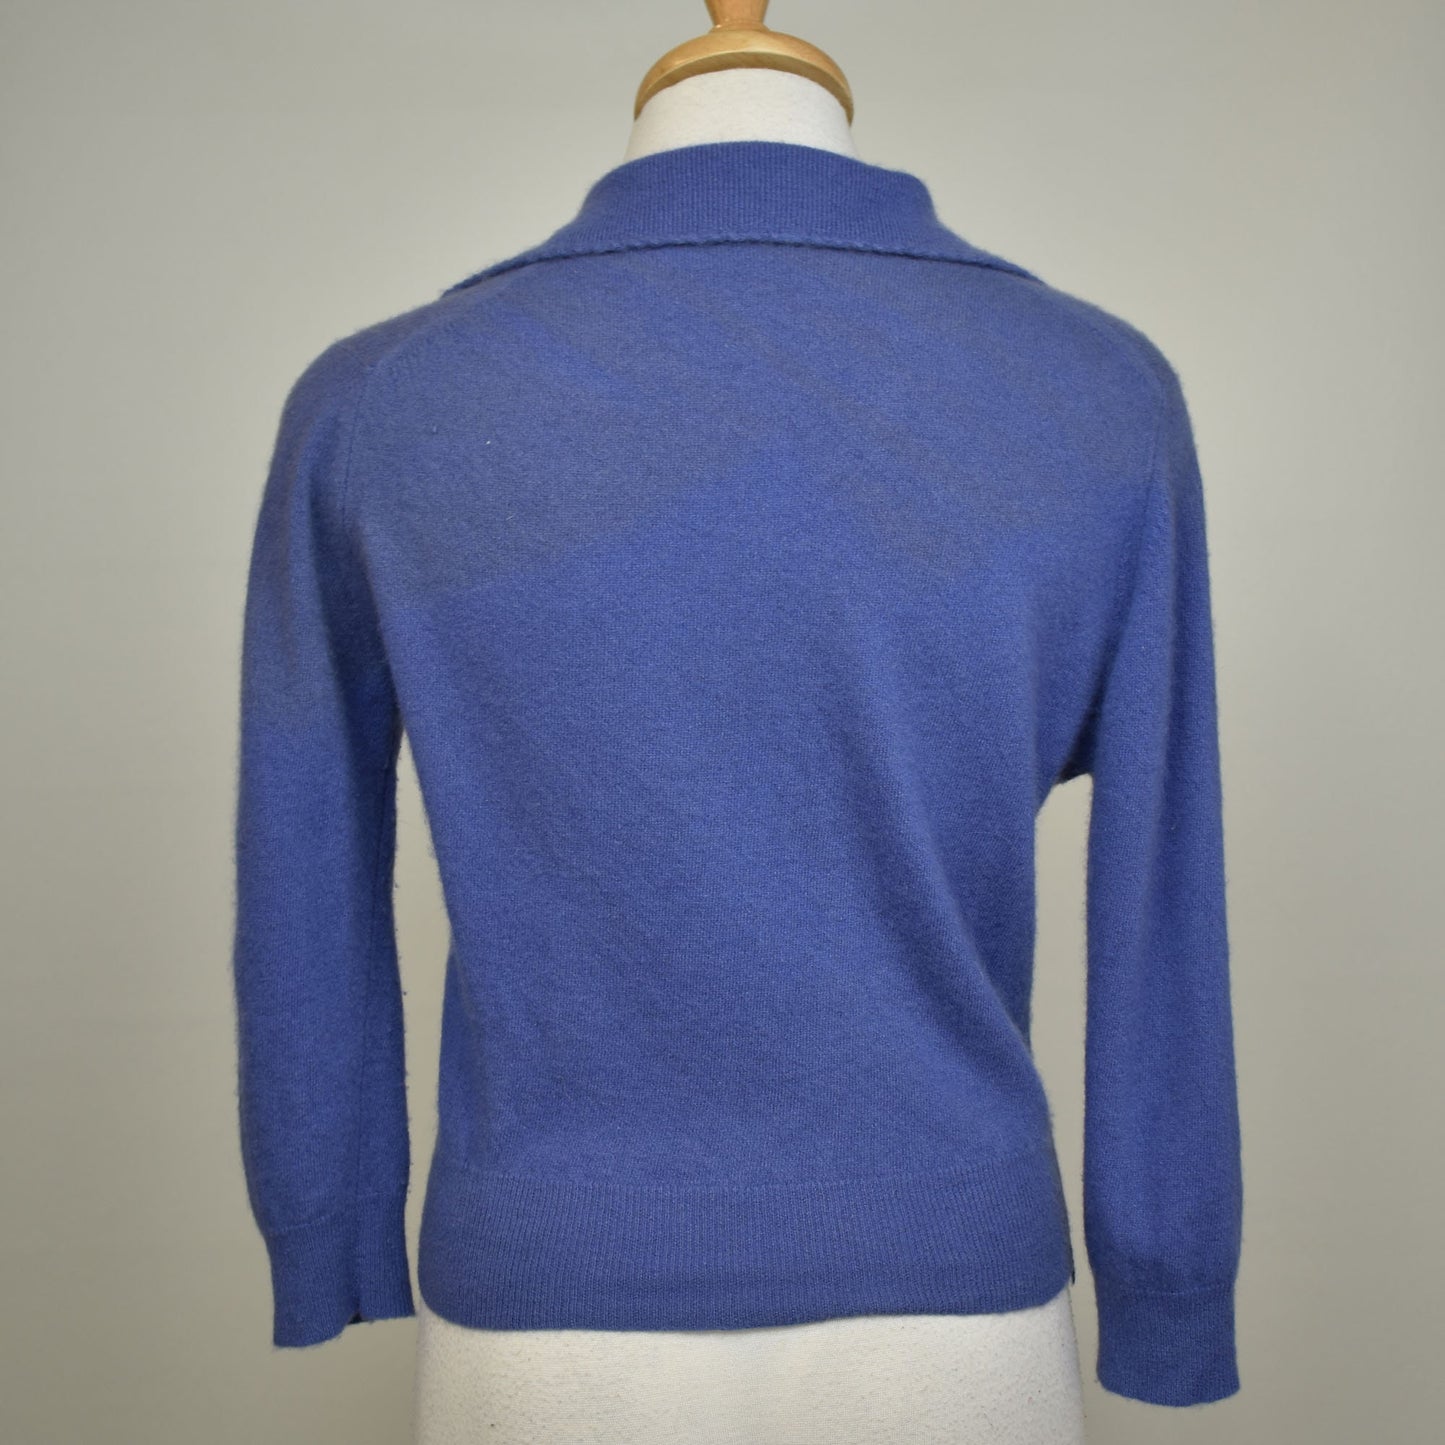 Vintage 50s Cashmere Sweater in Periwinkle Blue - Shawl Neck - Fifties Sweater Girl